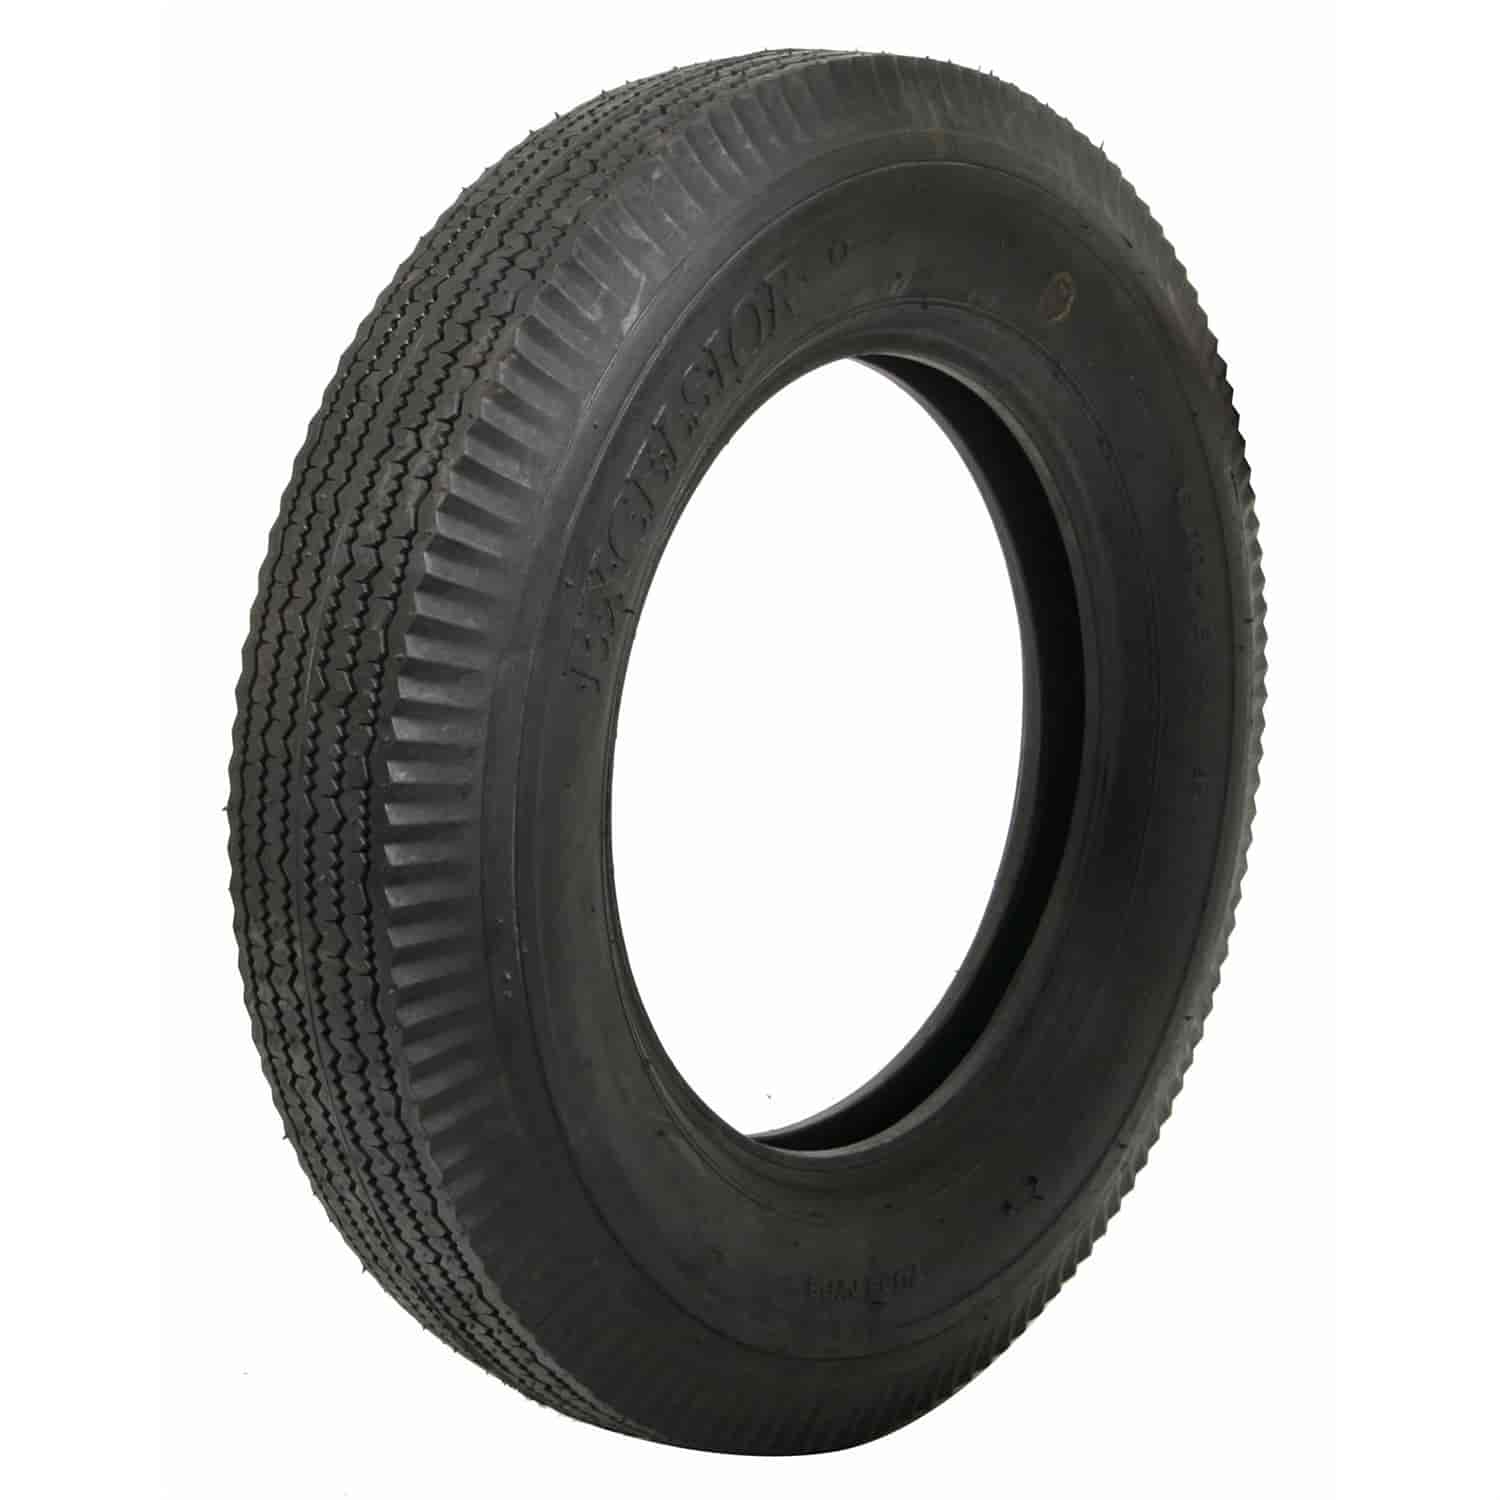 643530 Excelsior Bias Ply Tire 600-16